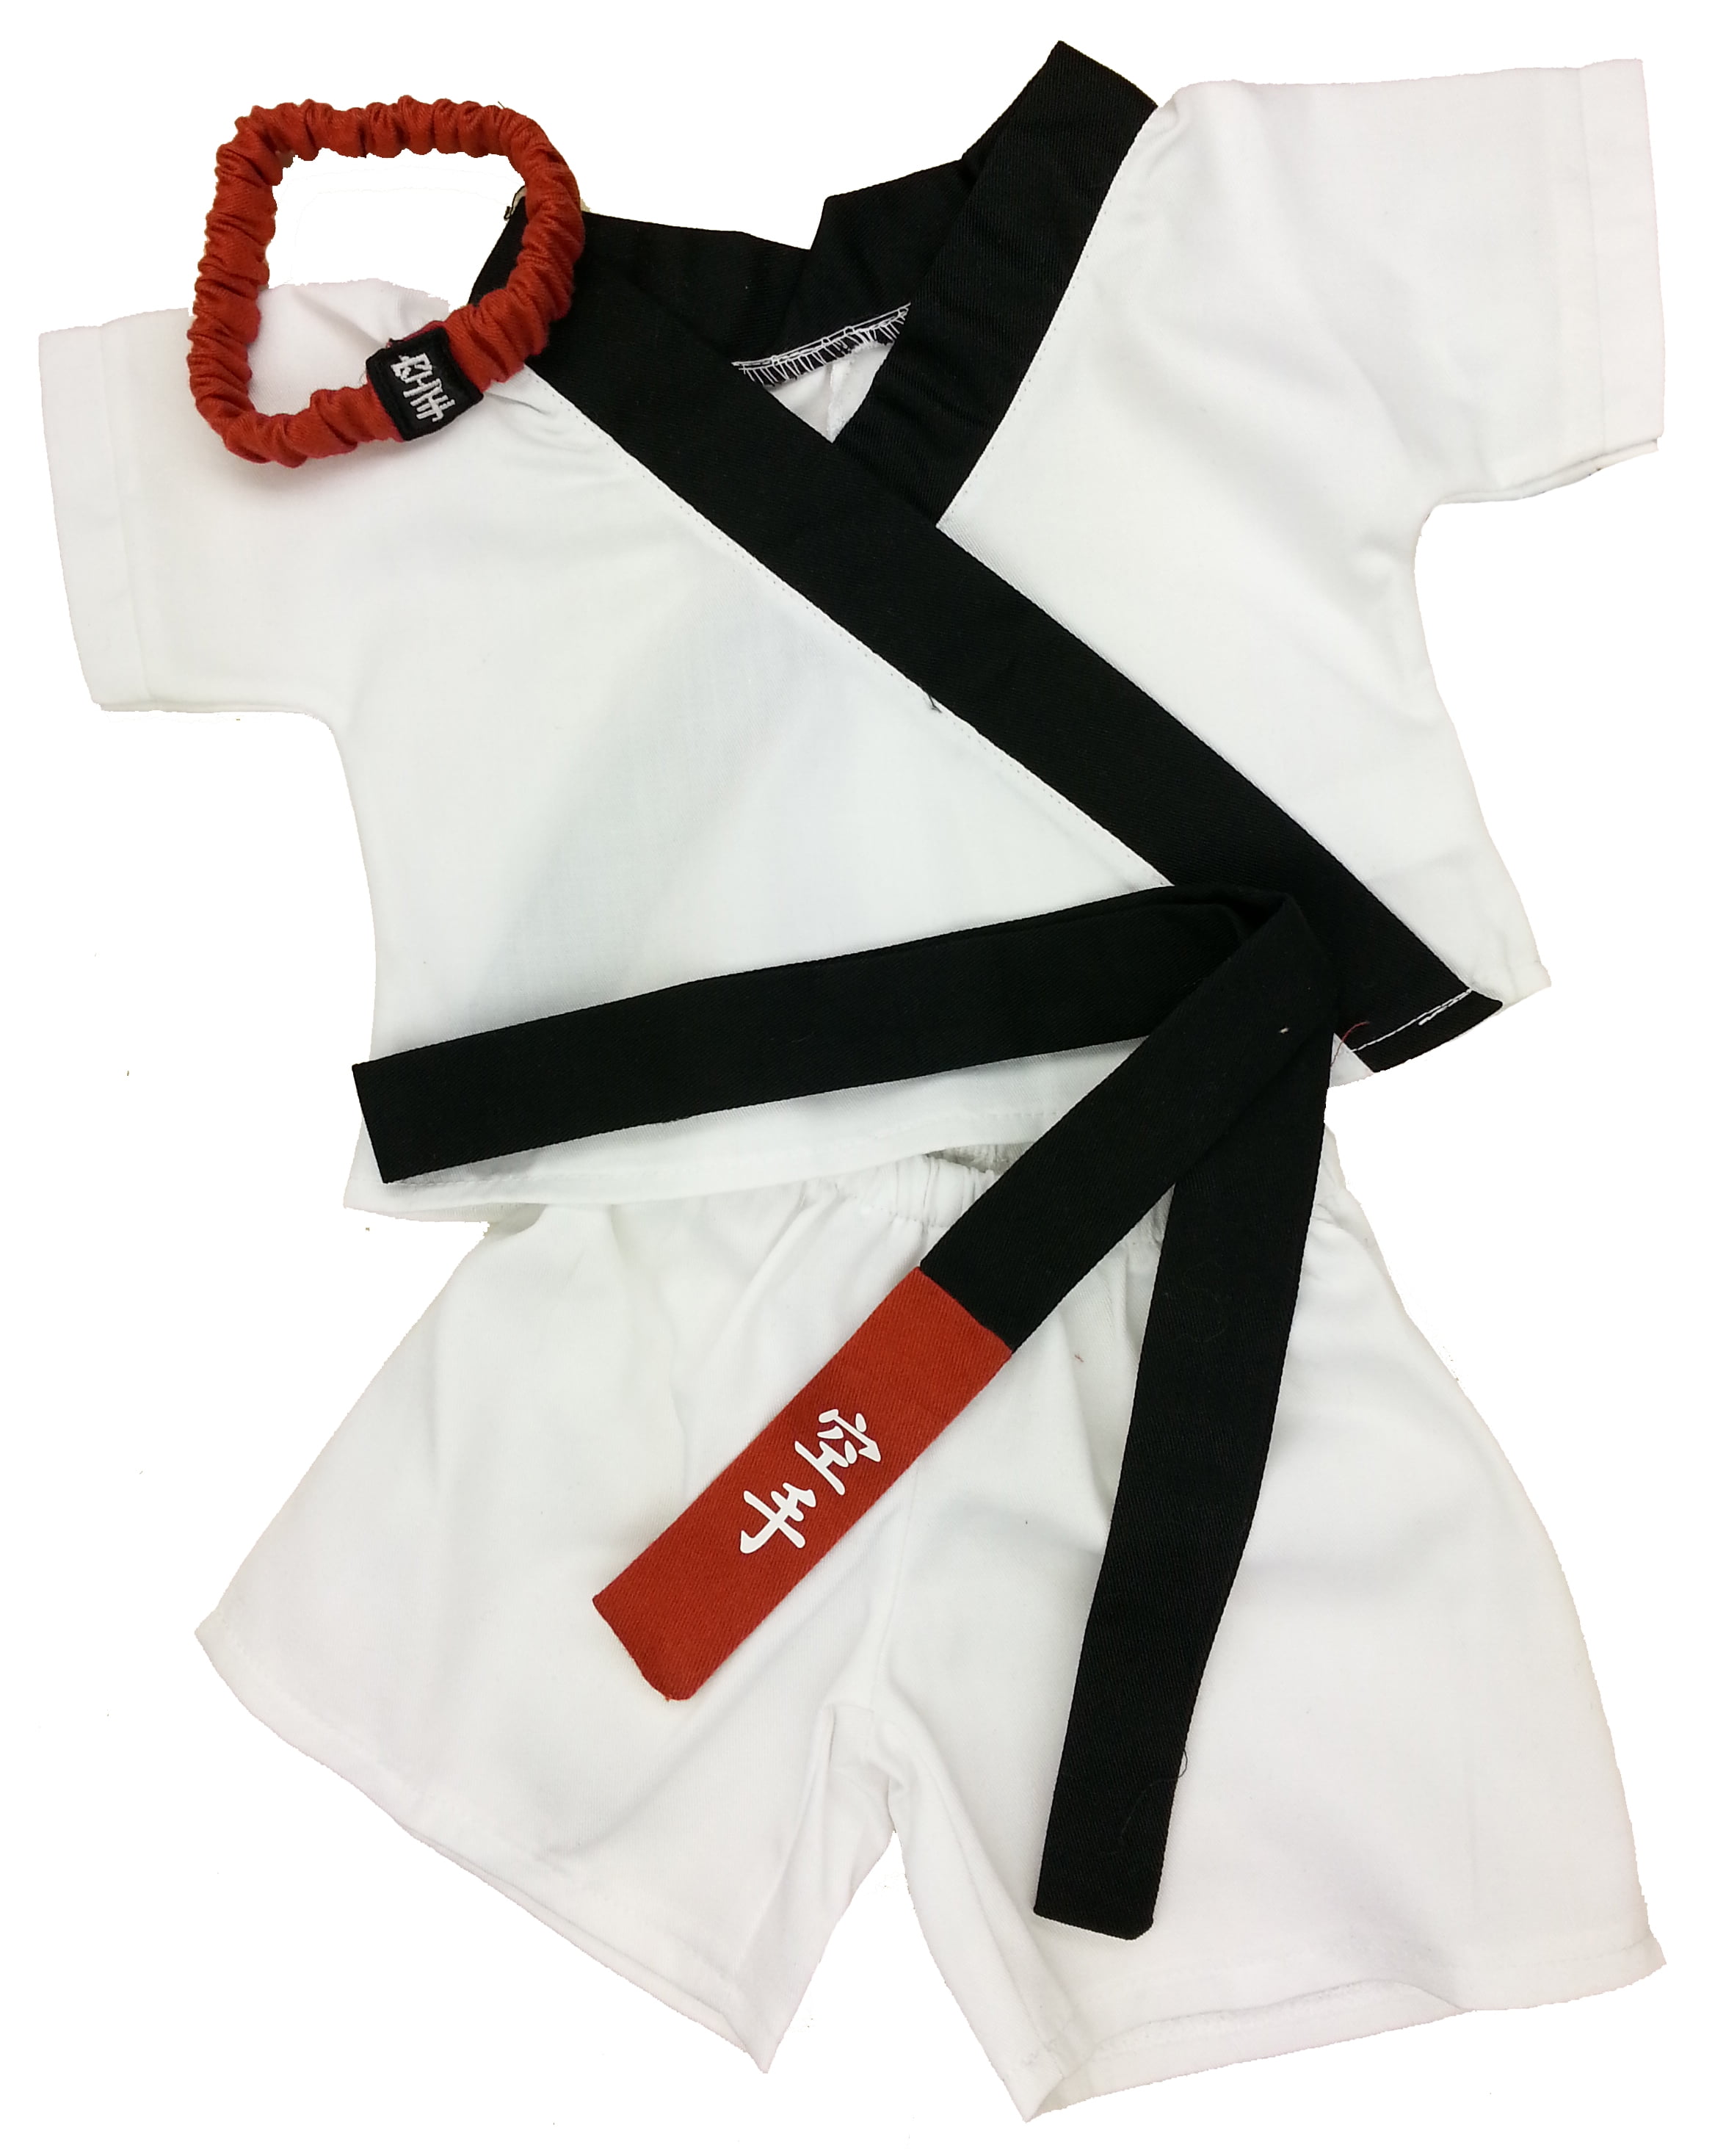 Karate Outfit Fits Most 14" - 18" Build-a-bear and Make Your Own